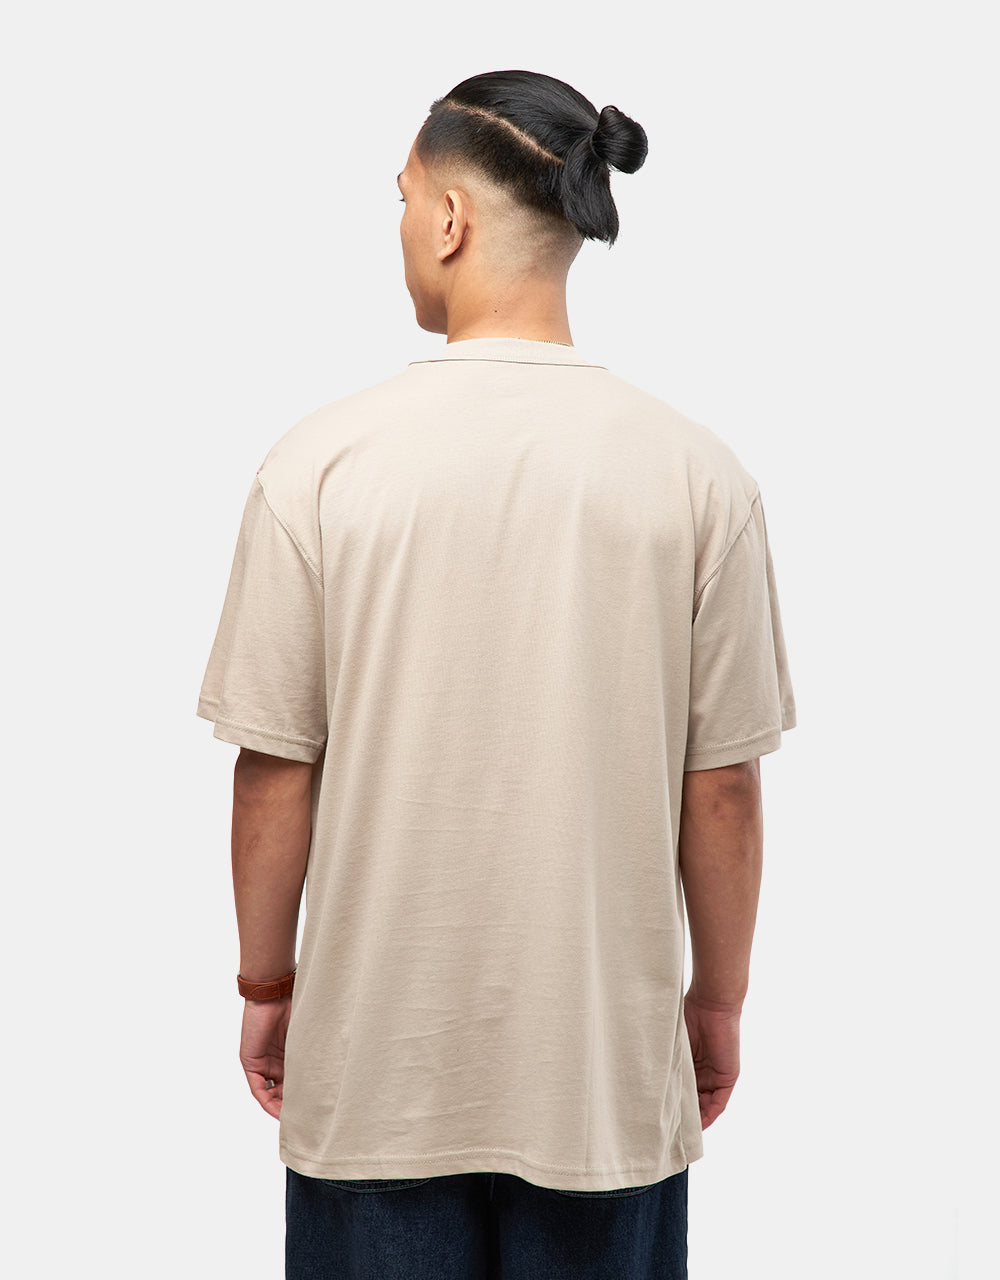 Dickies Aitkin Chest T-Shirt - Sandstone